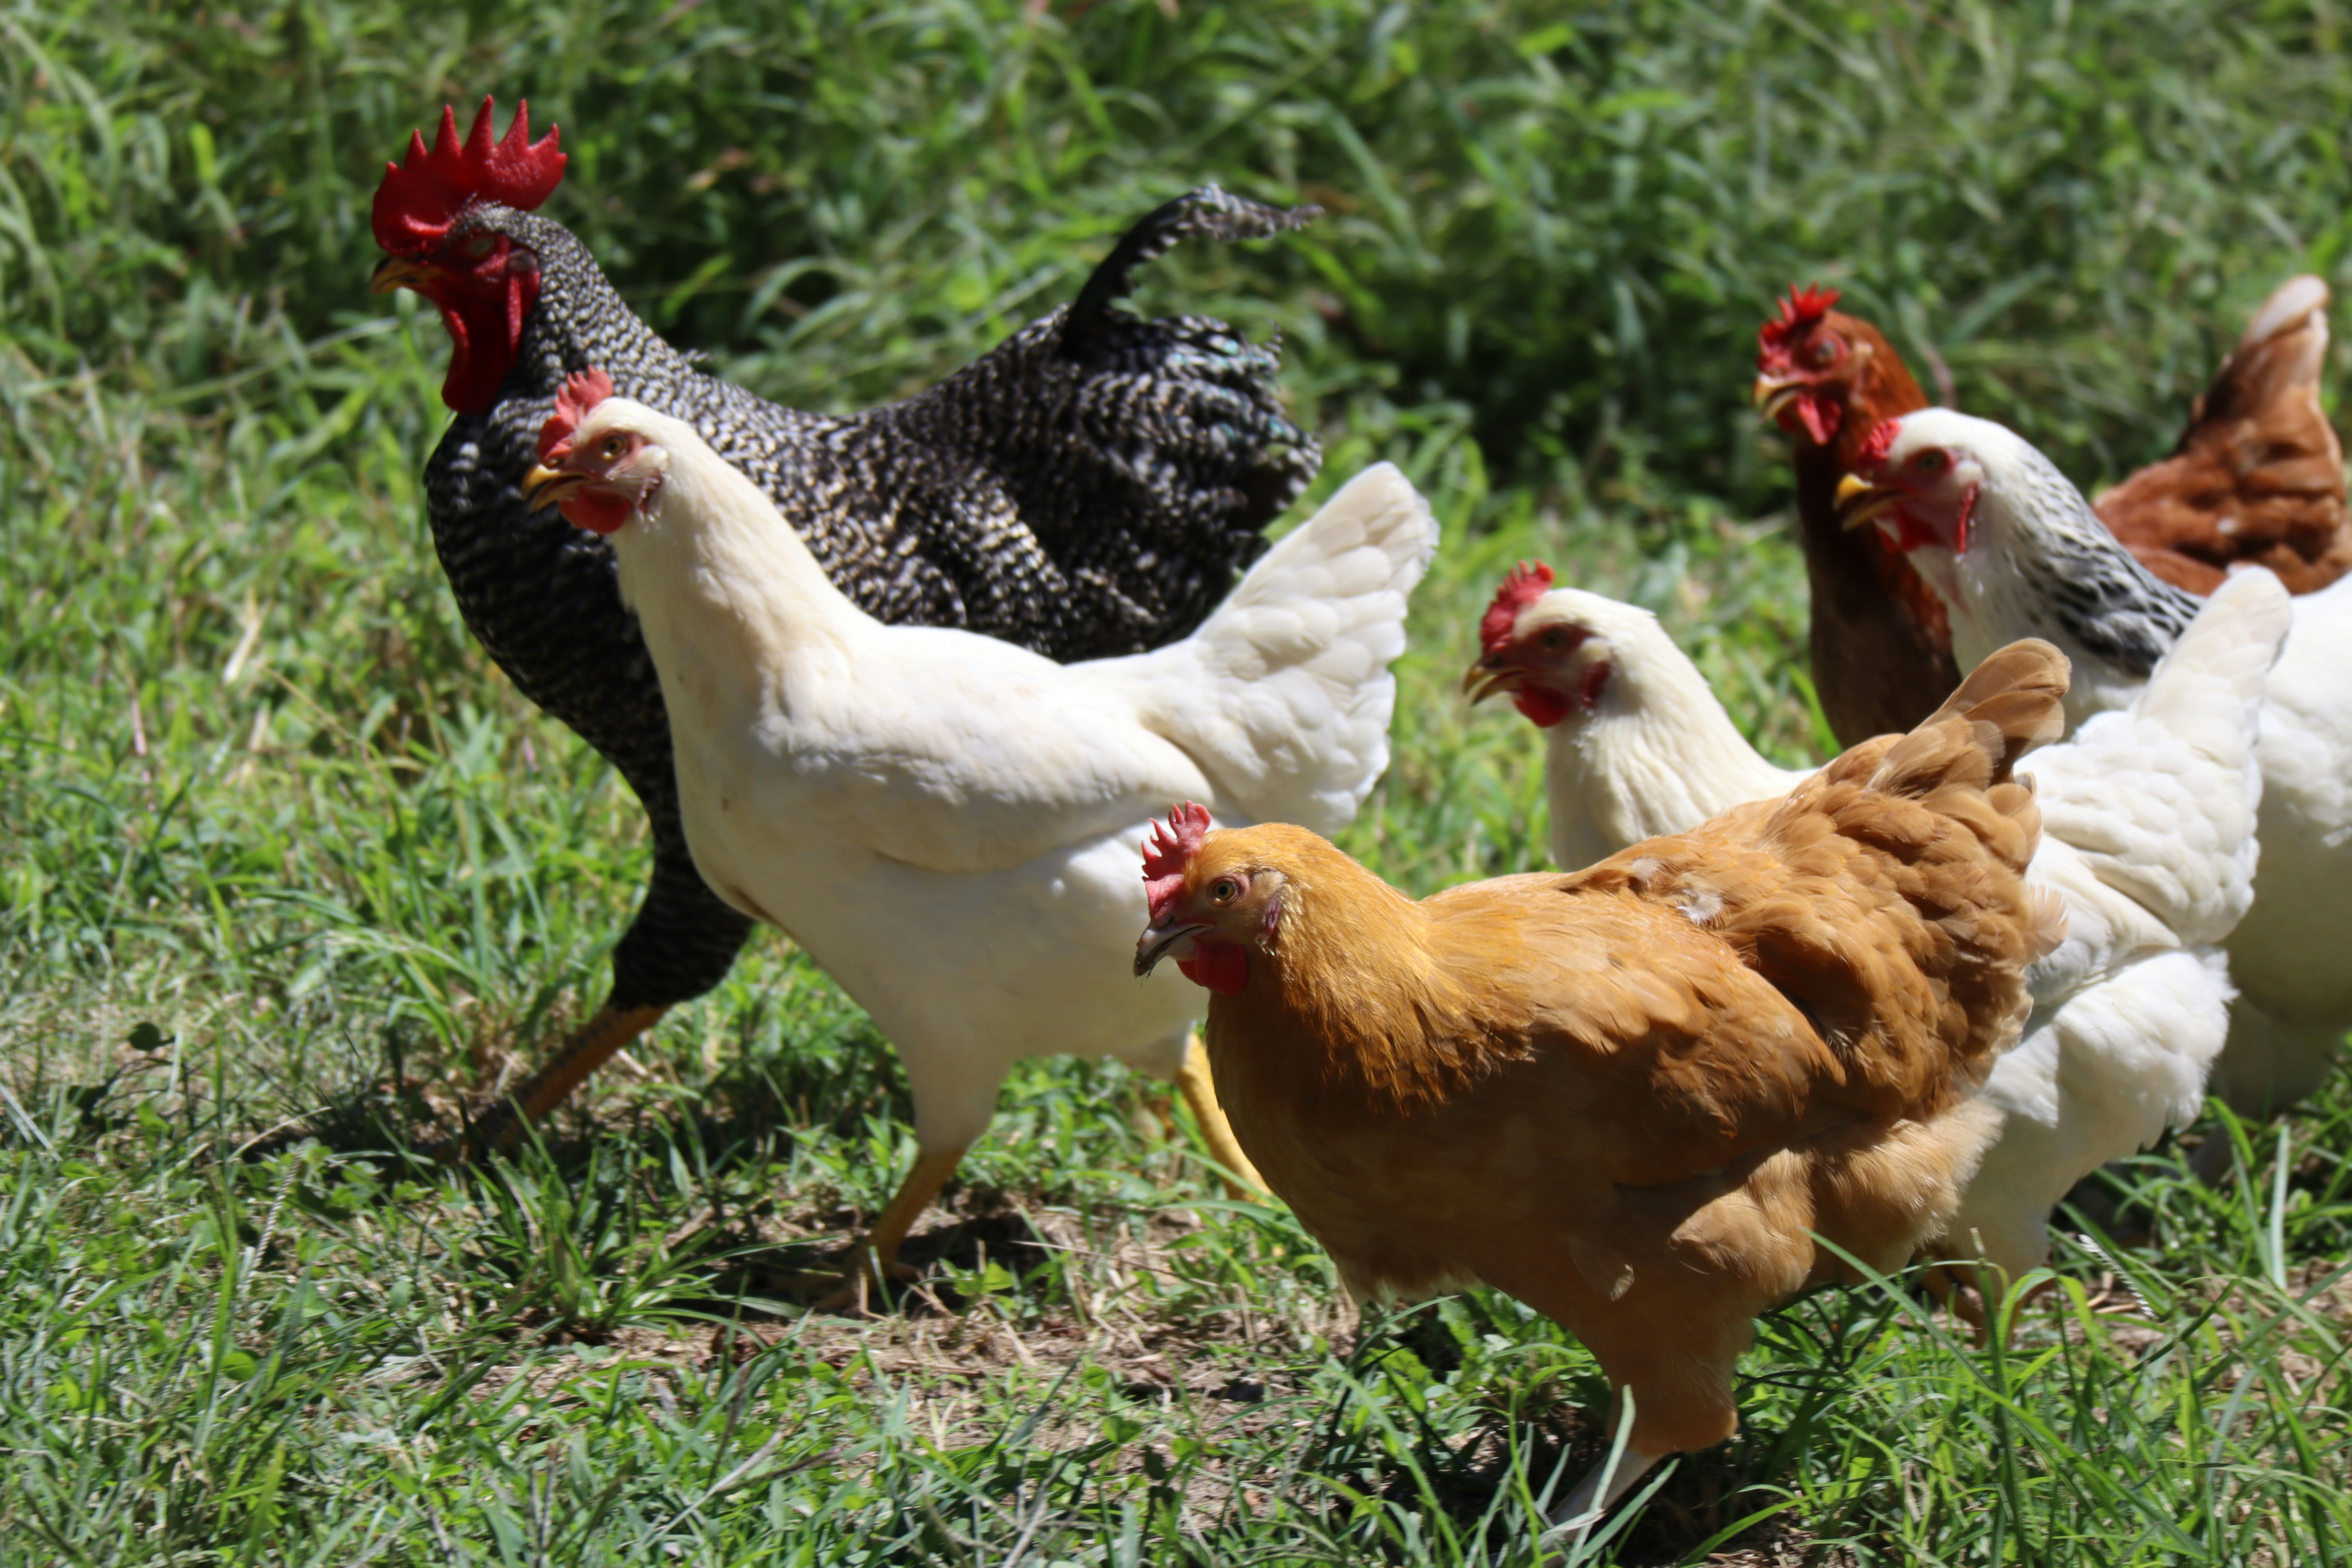 Red, white, and black chickens walking in grass